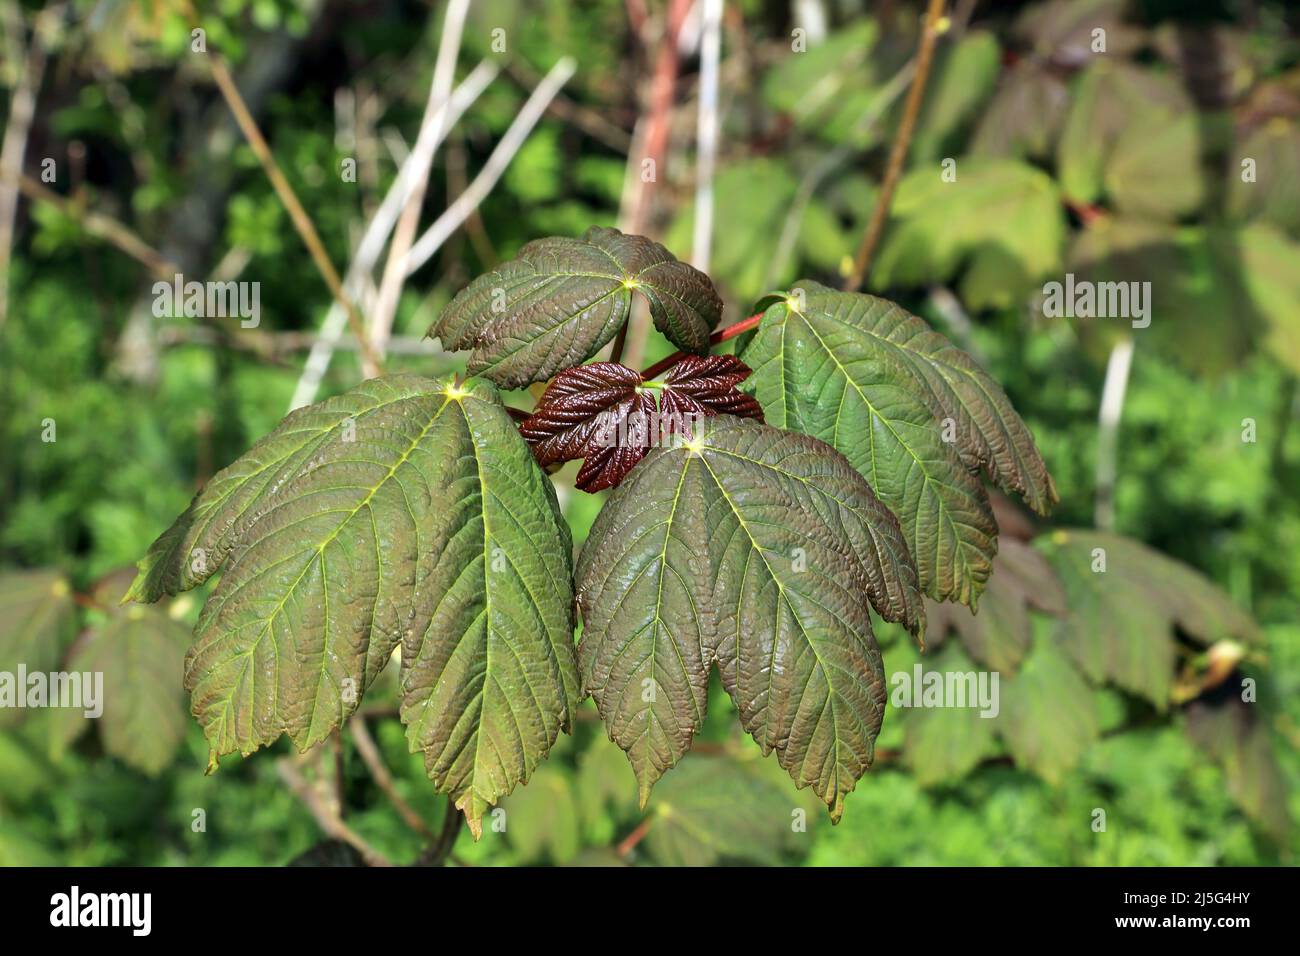 Young leaves of a sycamore tree in Spong Wood near Elmsted on the Kent Downs above Ashford, Kent, England, United Kingdom Stock Photo